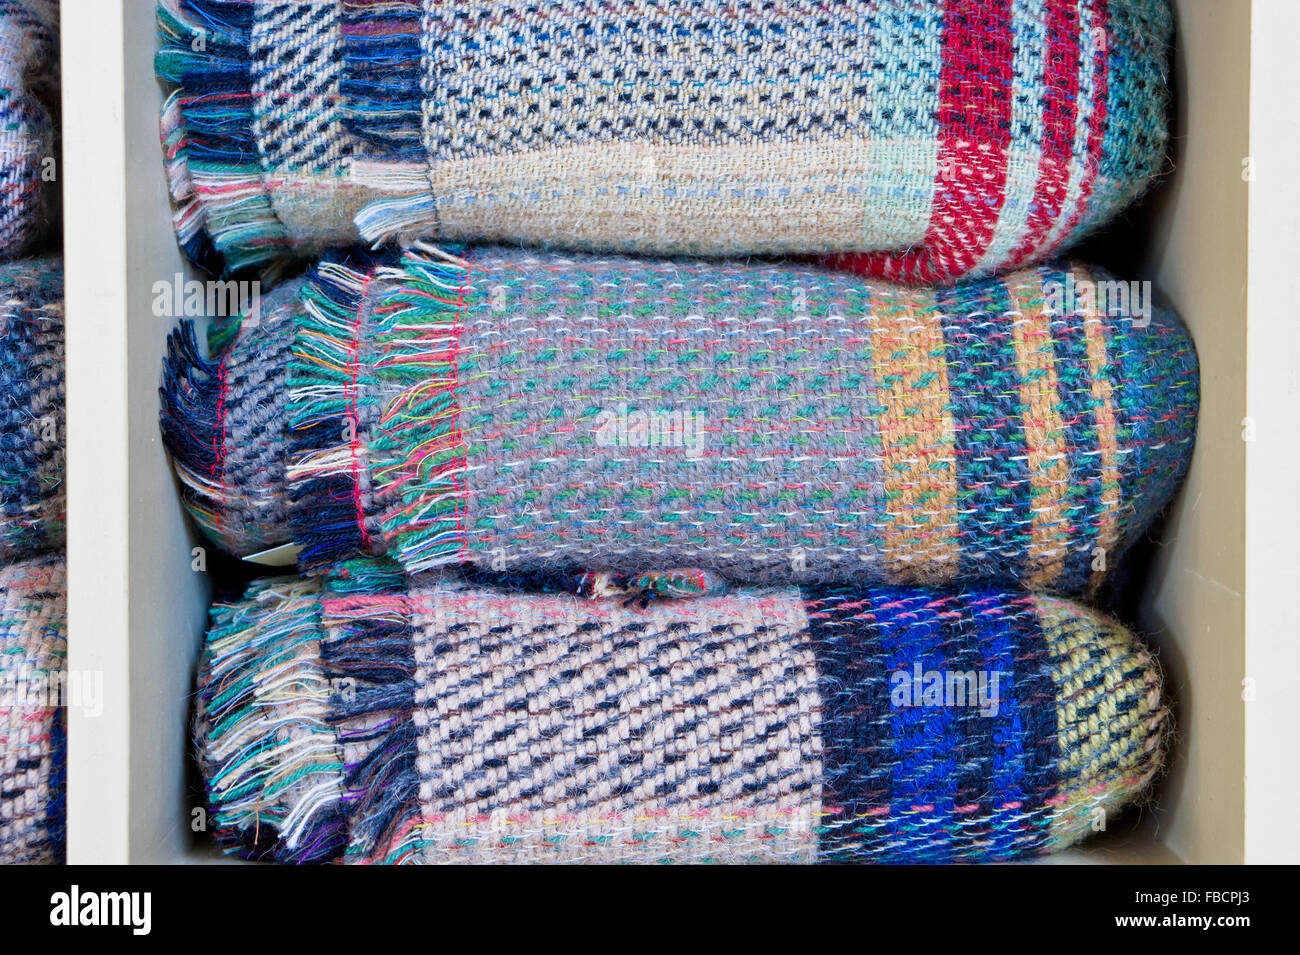 A stack of folded wool blankets Stock Photo